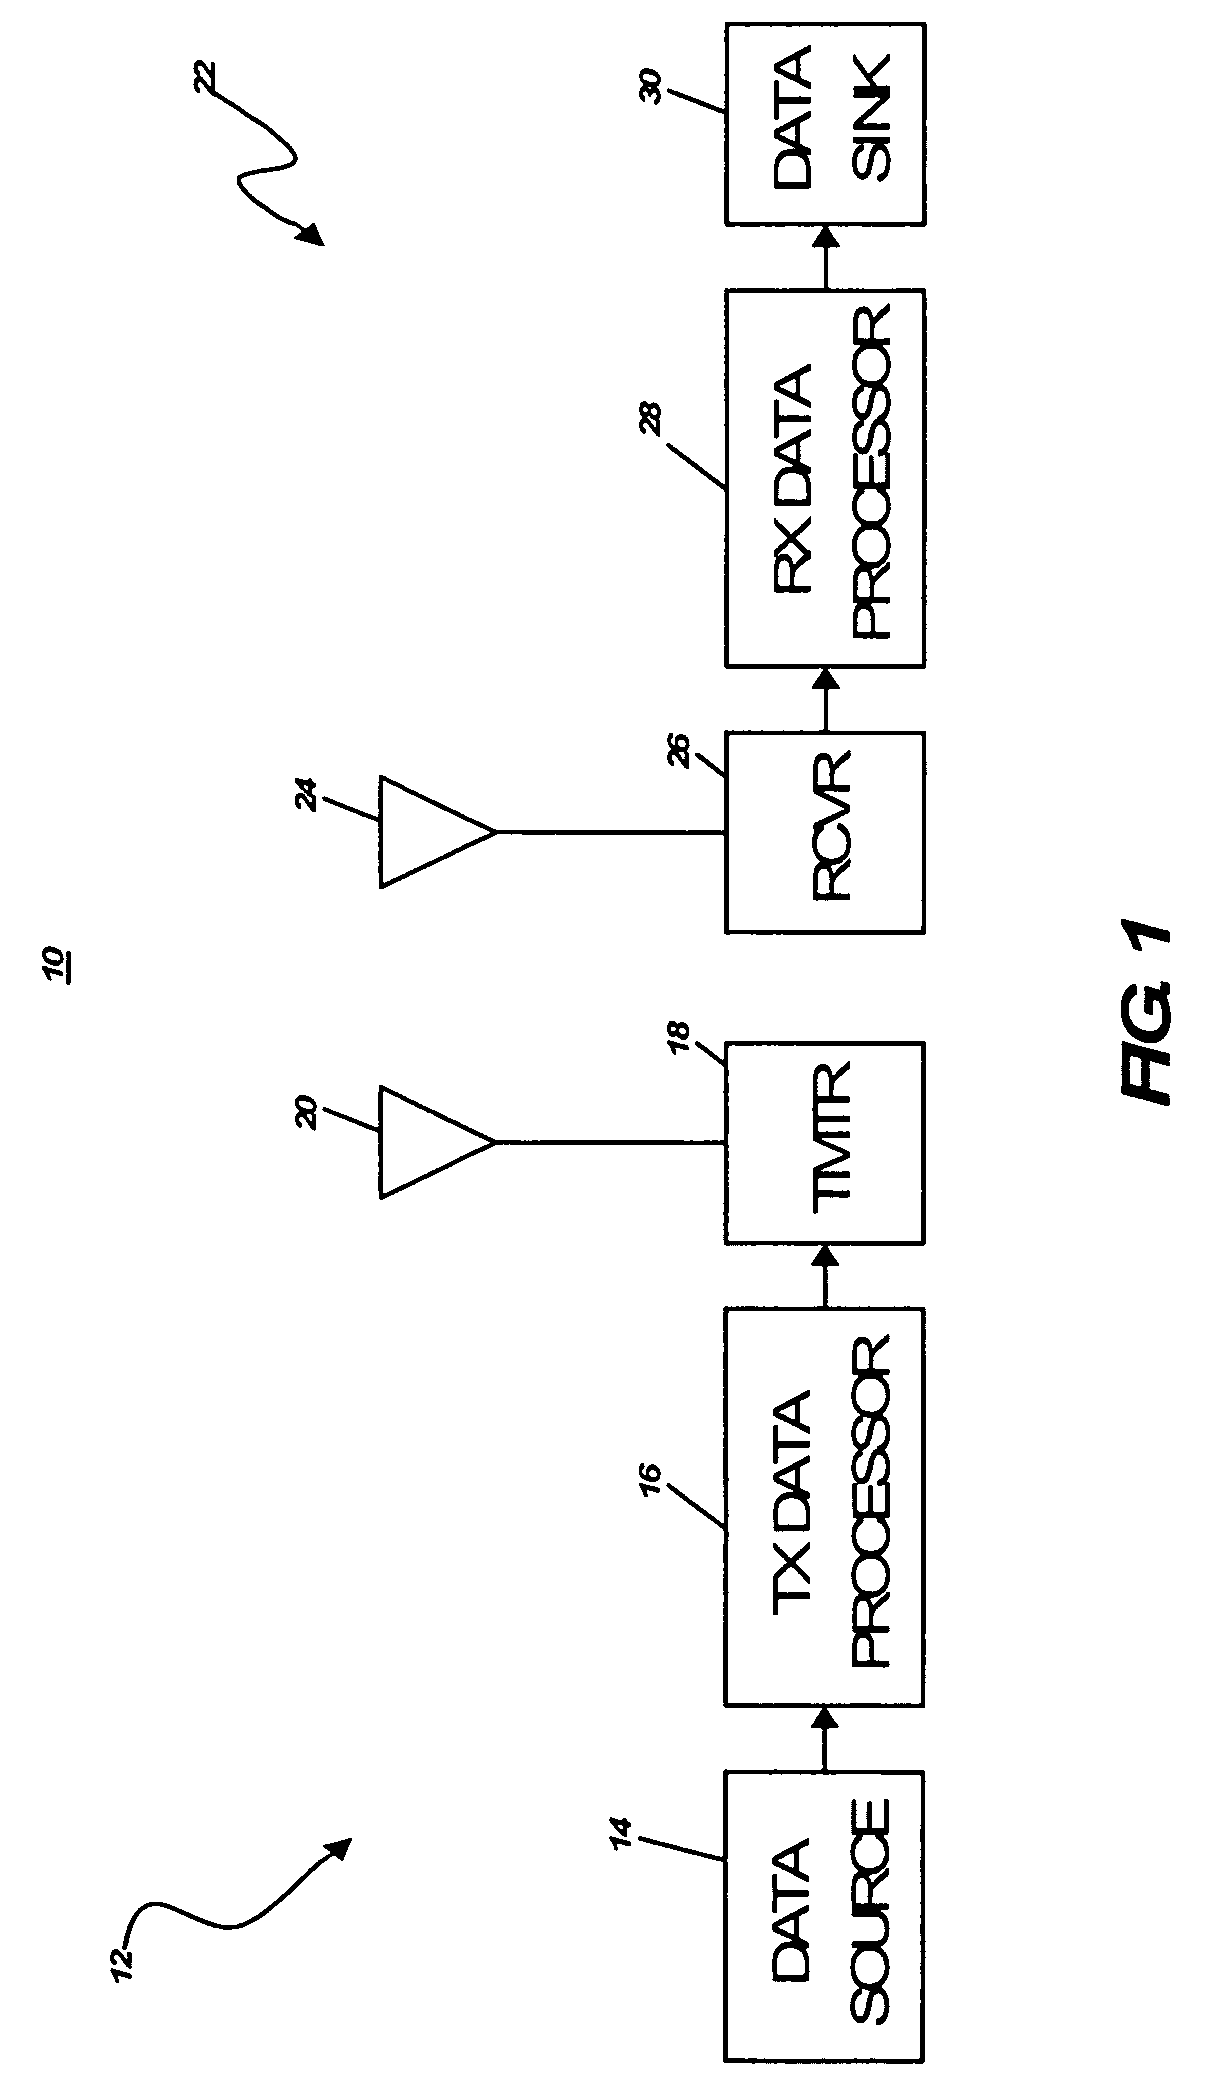 Mixed superscalar and VLIW instruction issuing and processing method and system